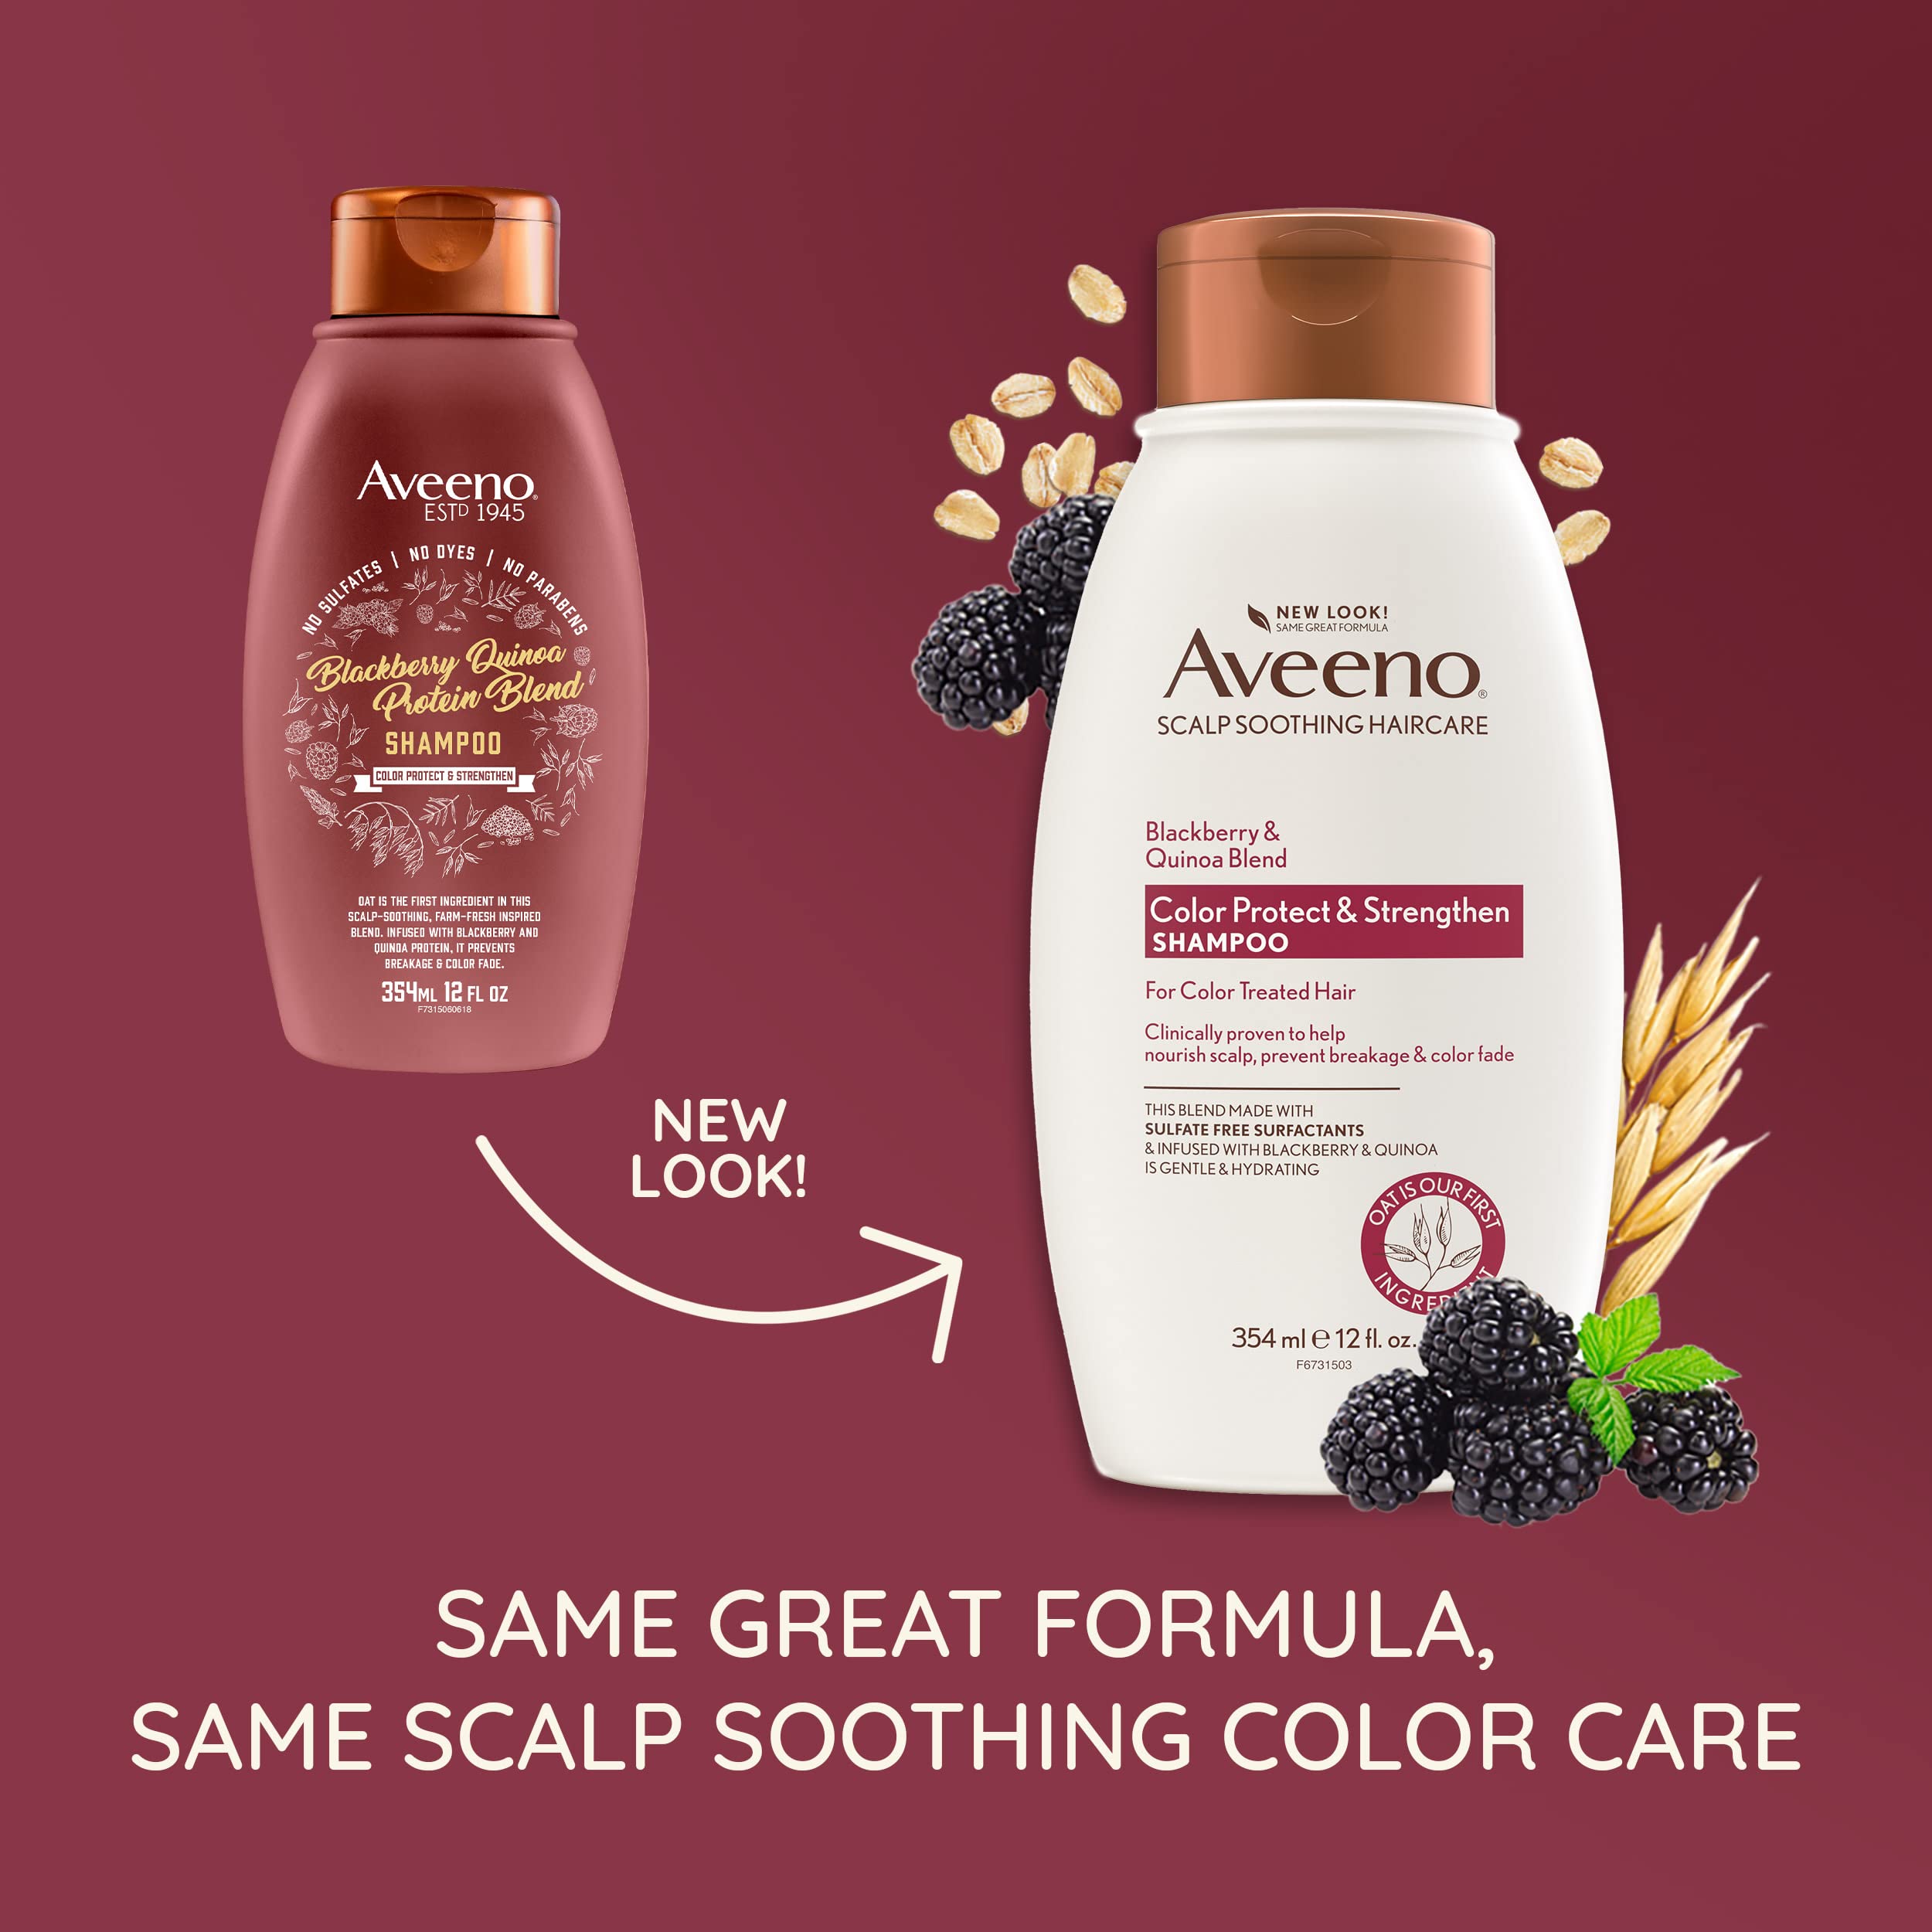 Aveeno Blackberry Quinoa Protein Blend Sulfate-Free Shampoo for Color-Treated Hair Protection, Daily Strengthening & Moisturizing Shampoo, Paraben & Dye-Free, 12 Fl Oz